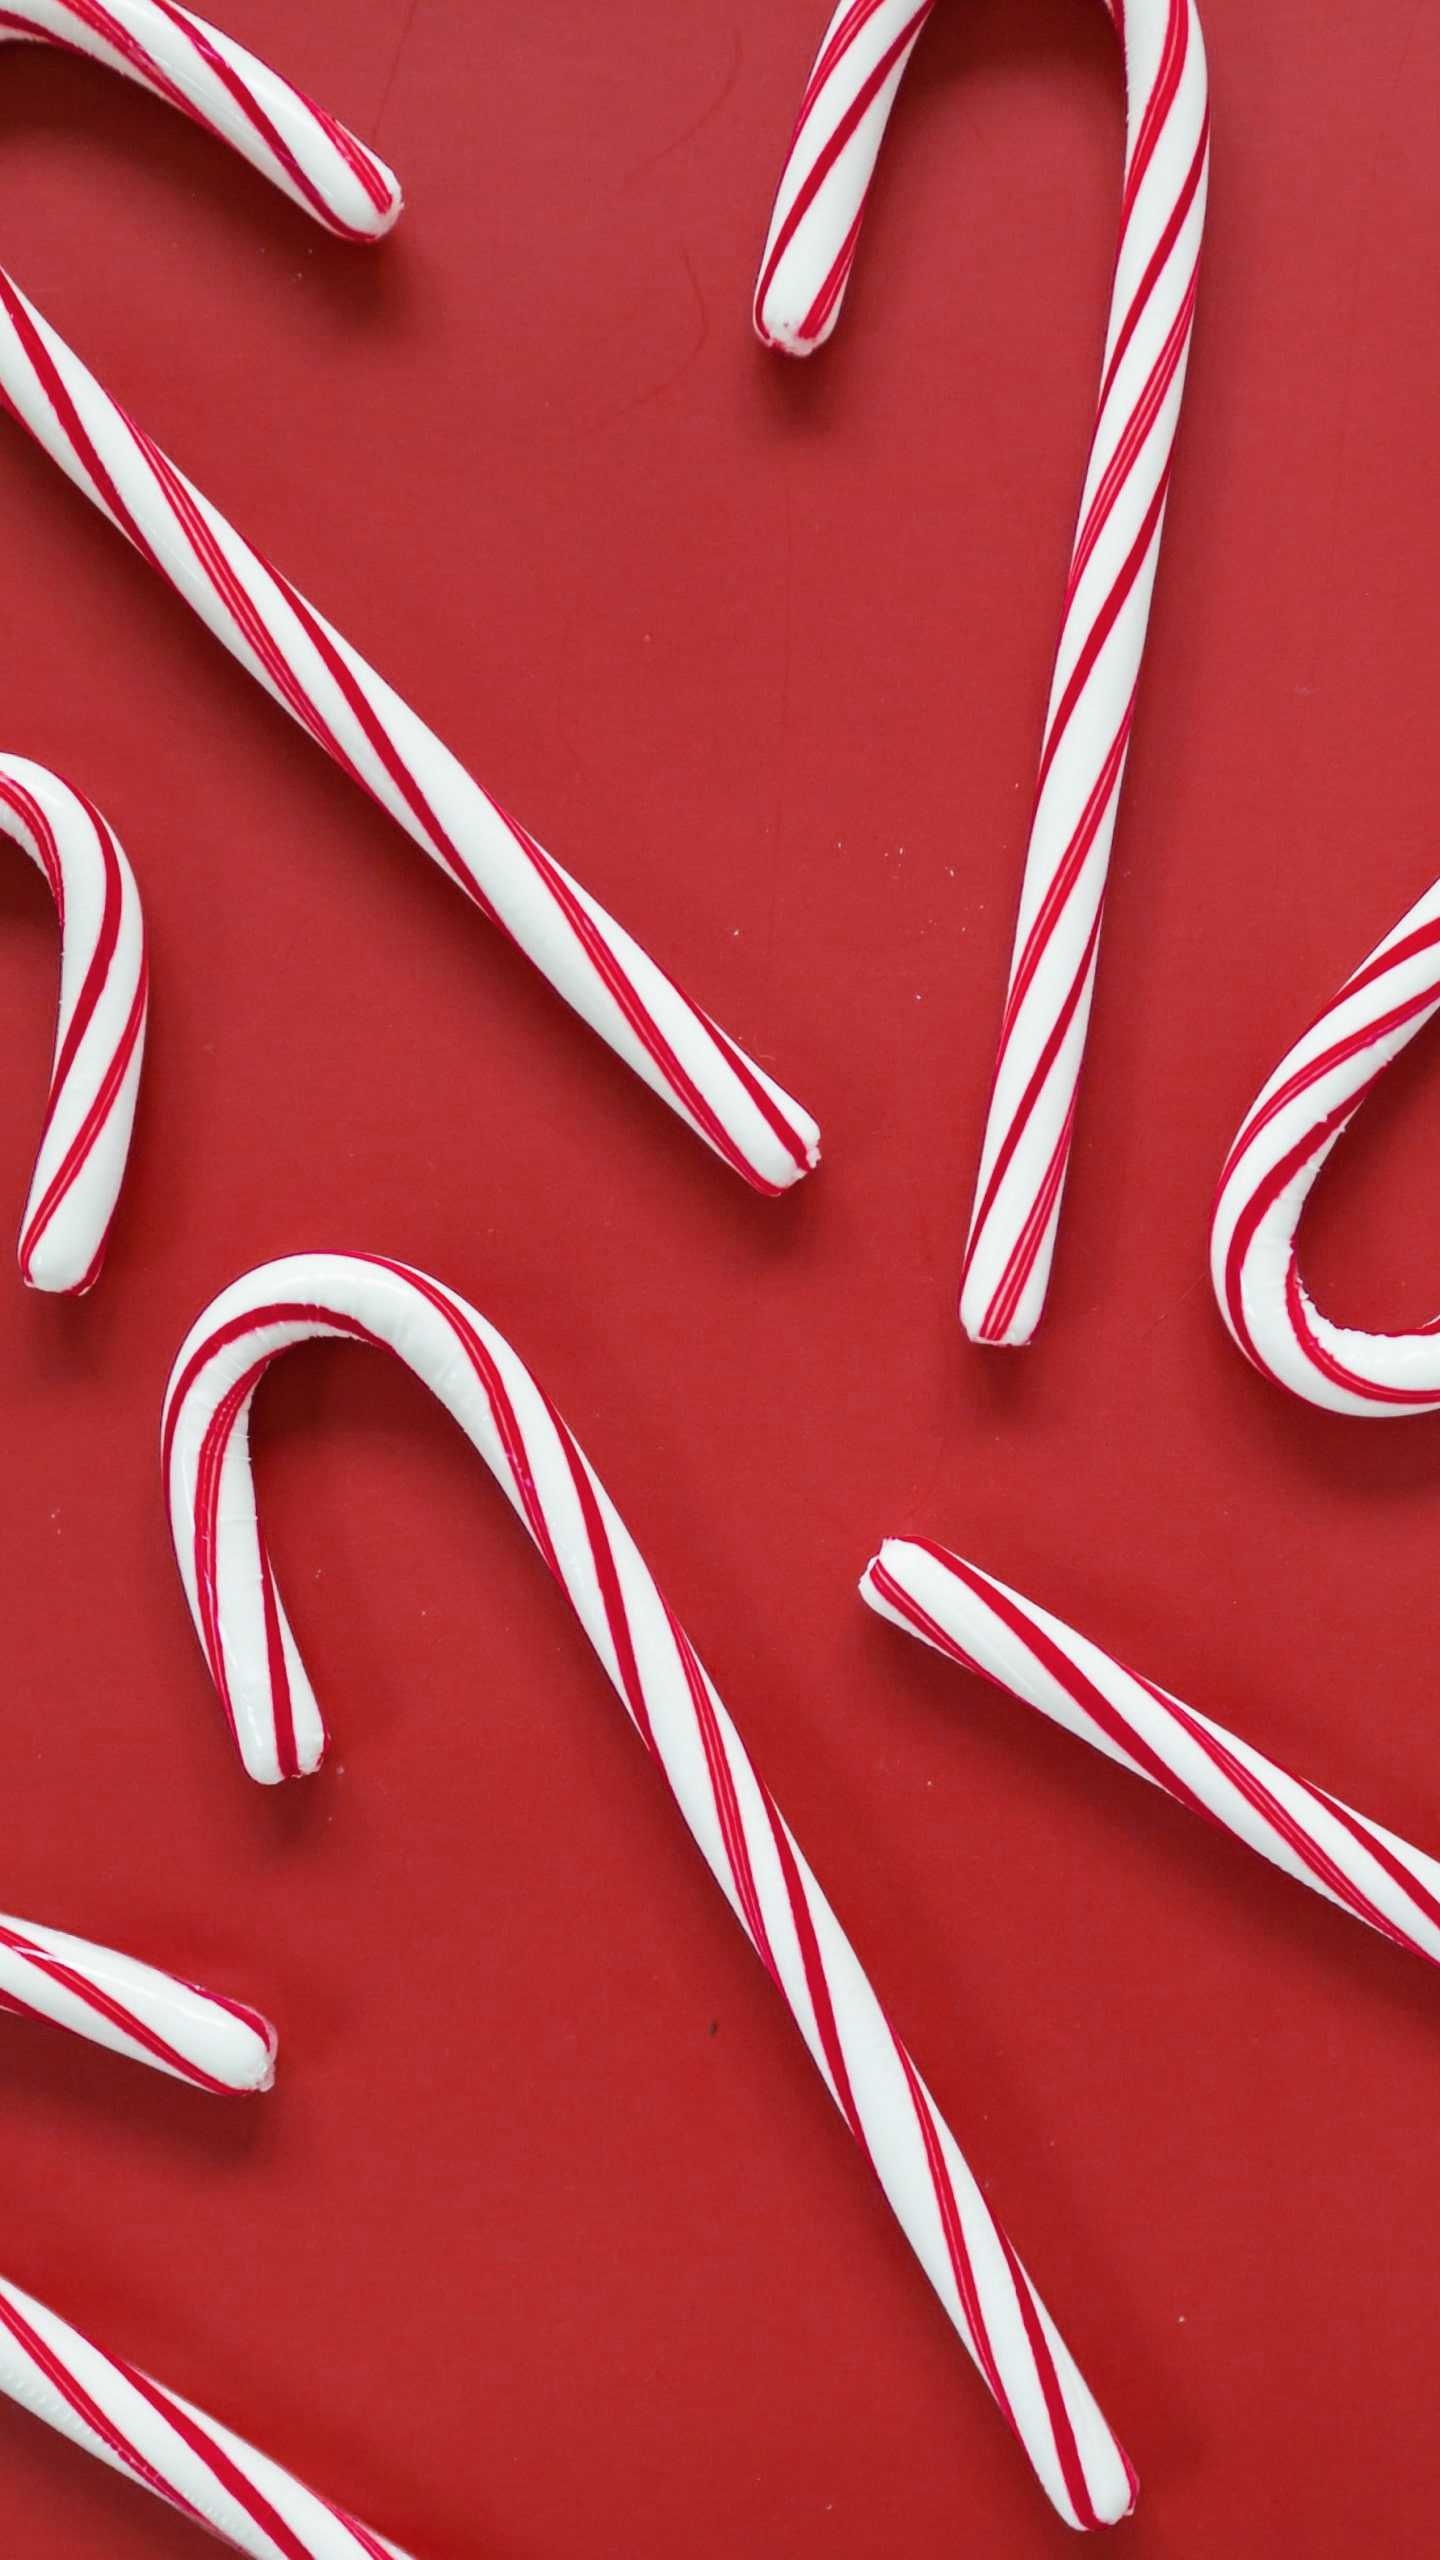 Candy cane background, Festive design, Sweet delight, Holiday spirit, 1440x2560 HD Handy